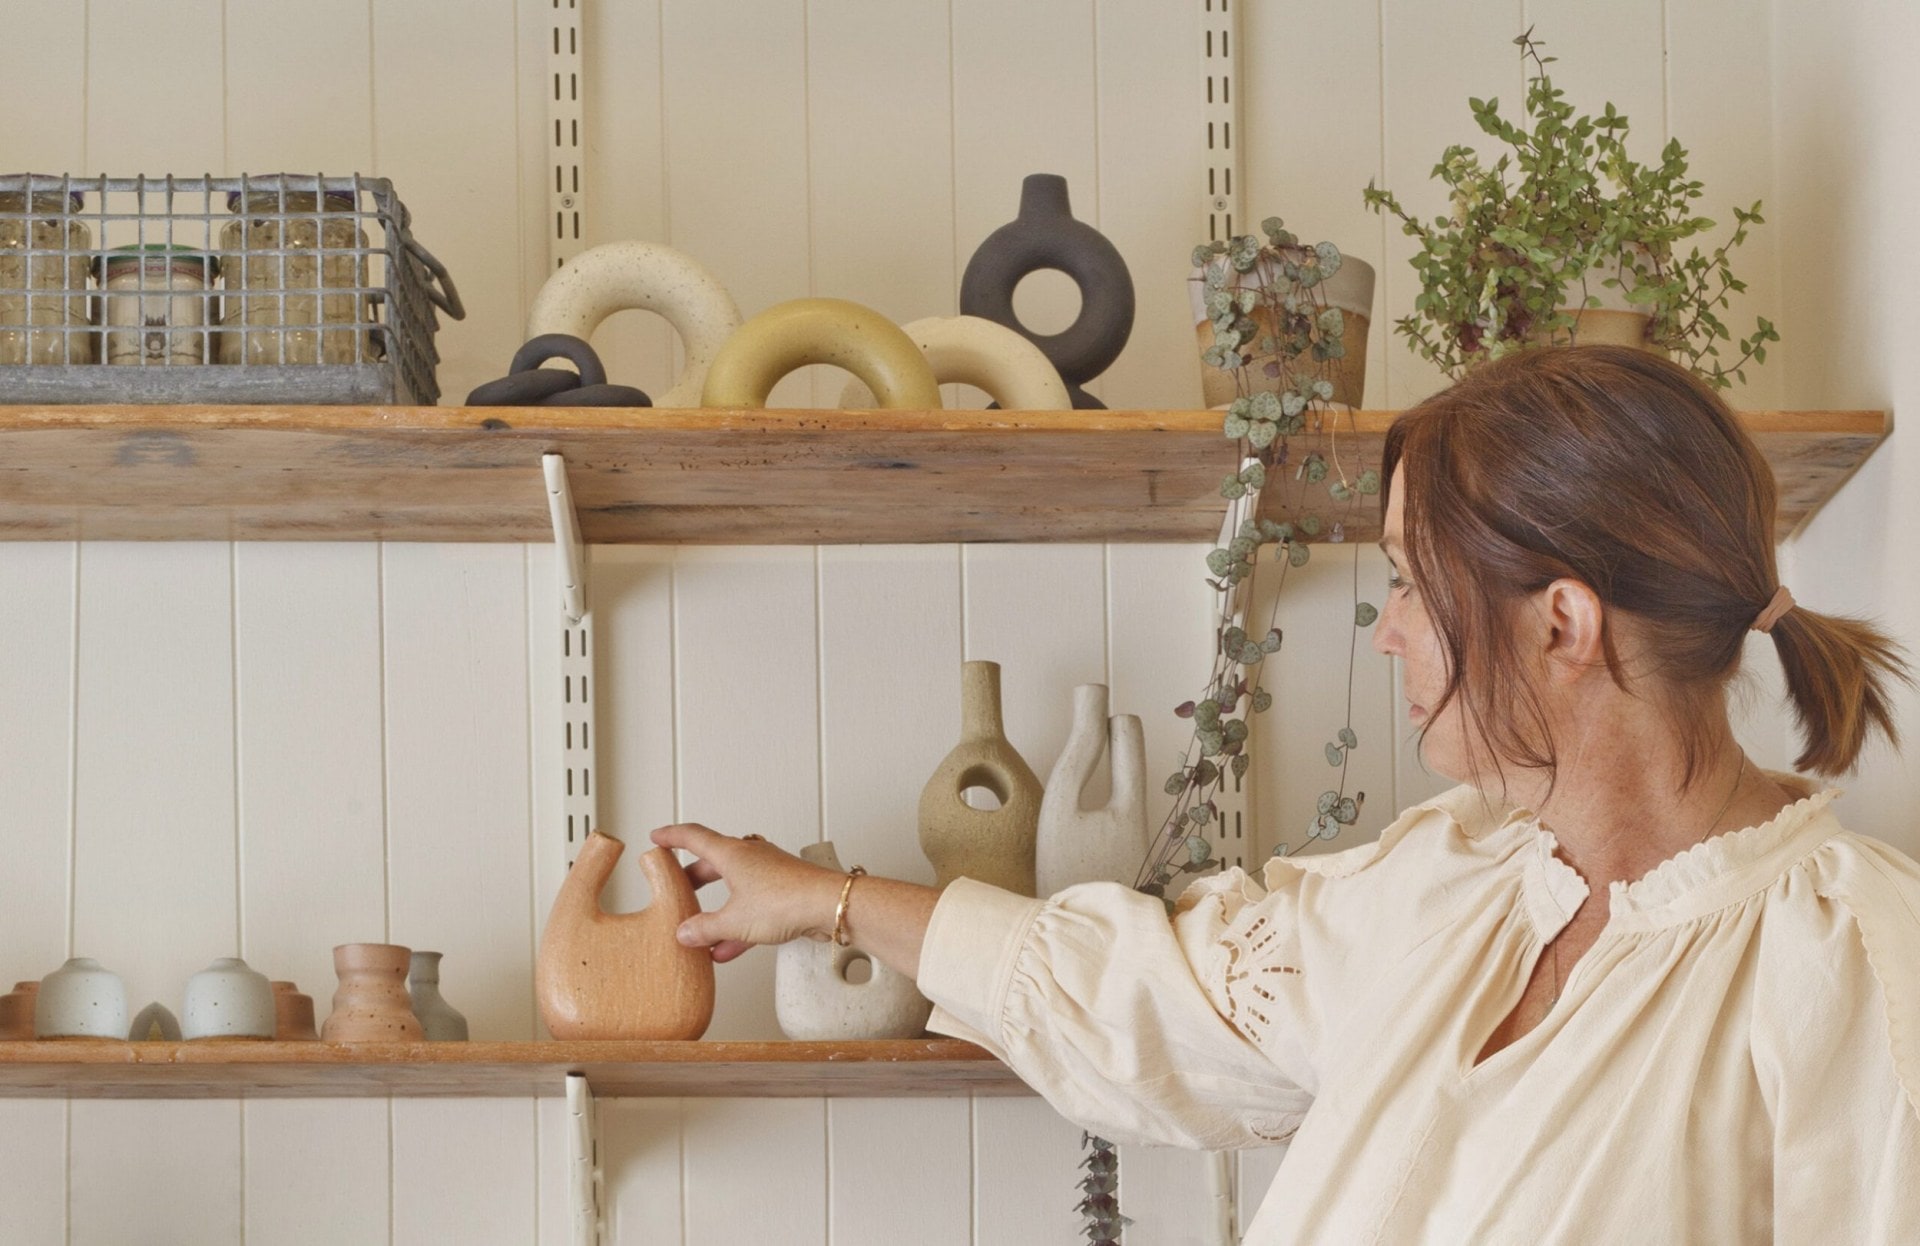 Deborah Sweeney reaching out to touch a ceramic ornament on a shelf filled with assorted ceramics